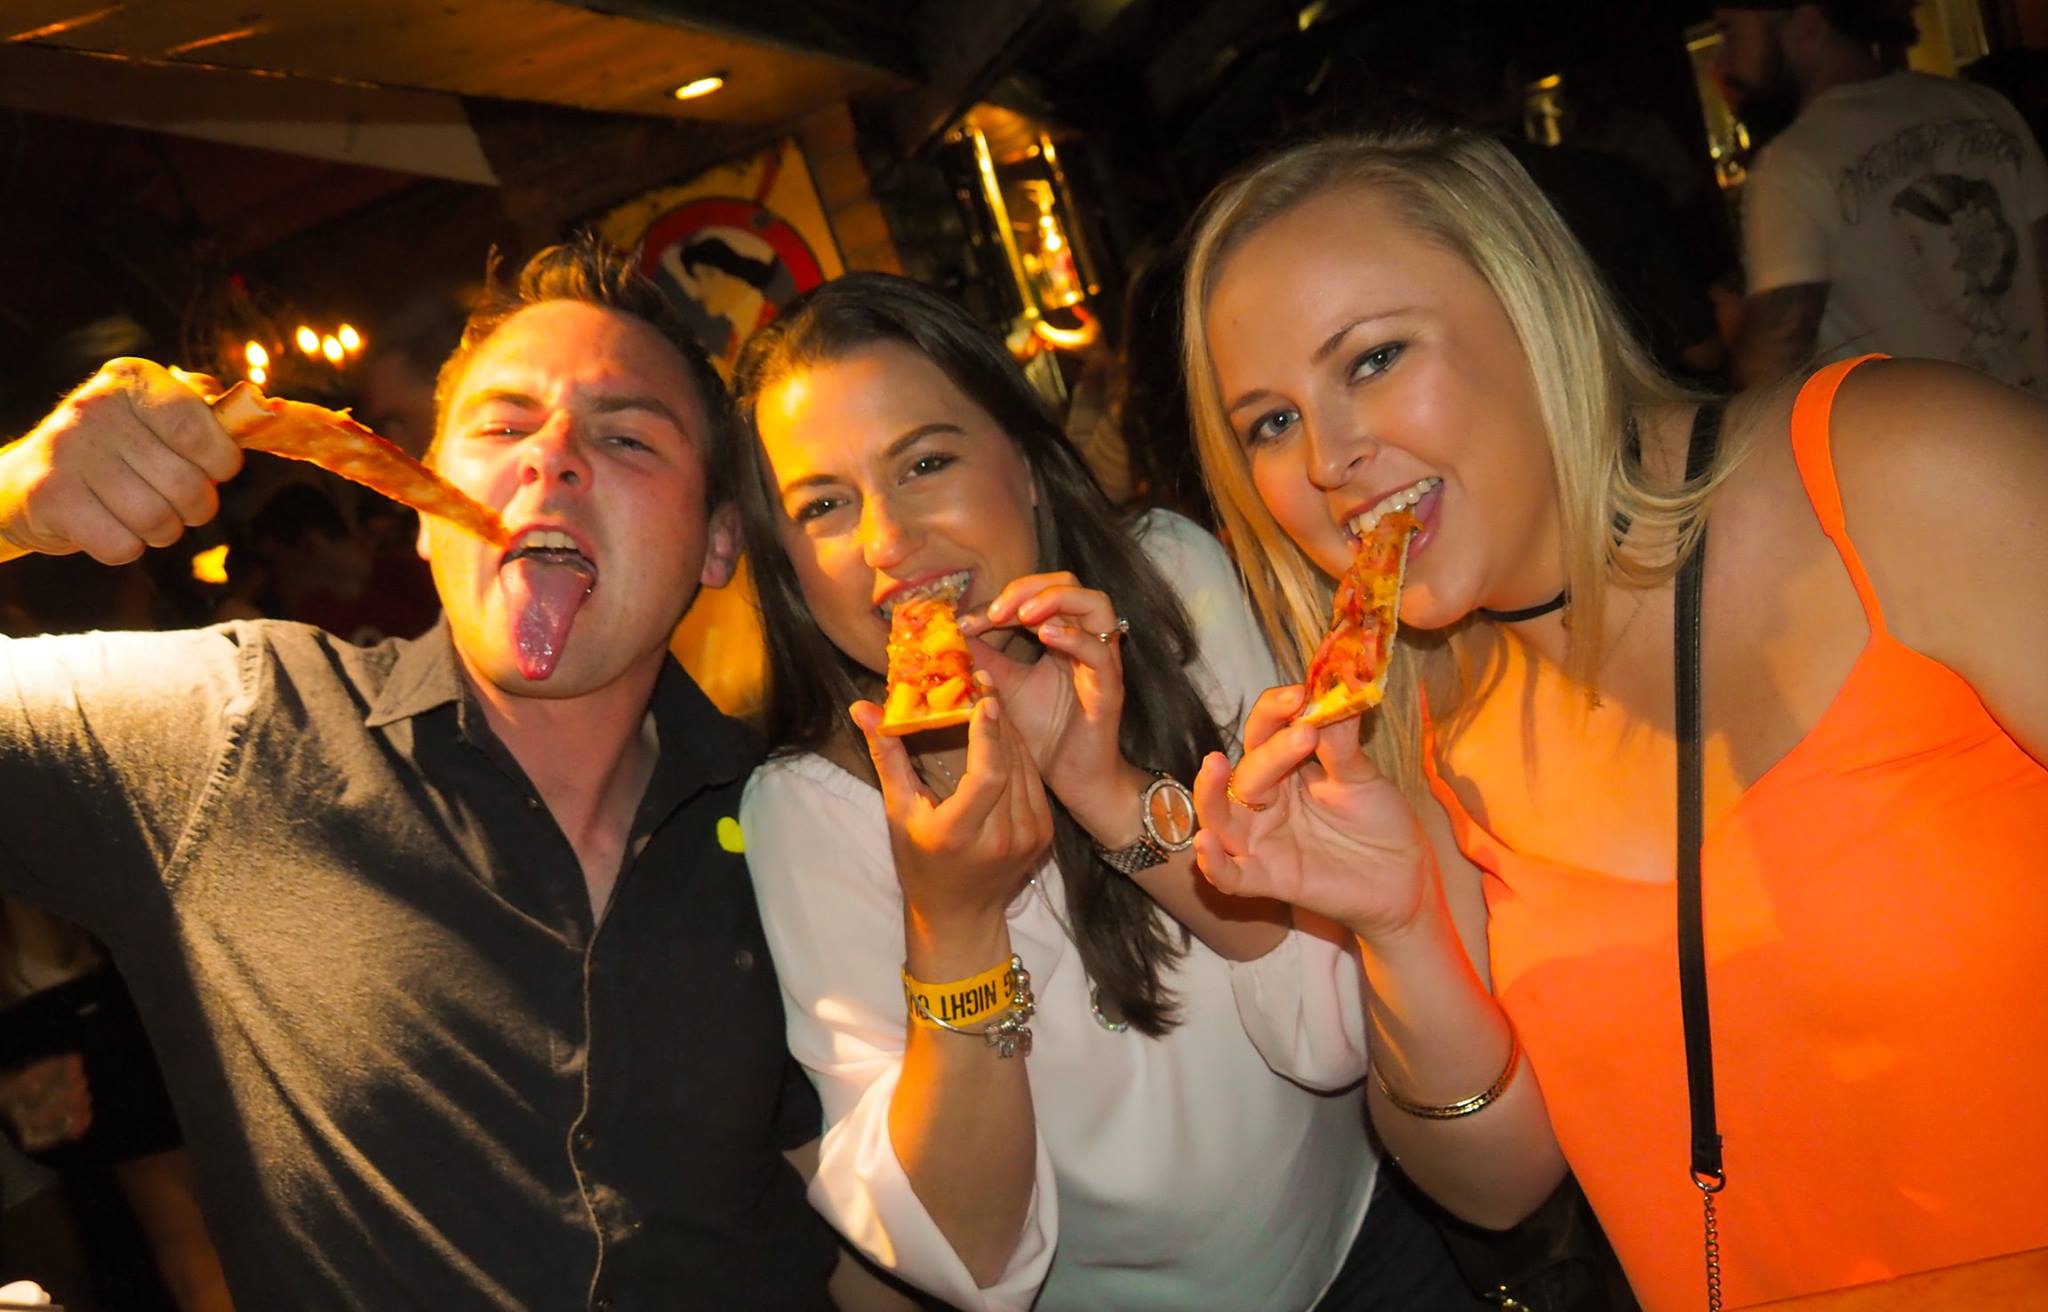 guests on the big night out pub crawl eating the free pizza given out on Saturday in Queenstown